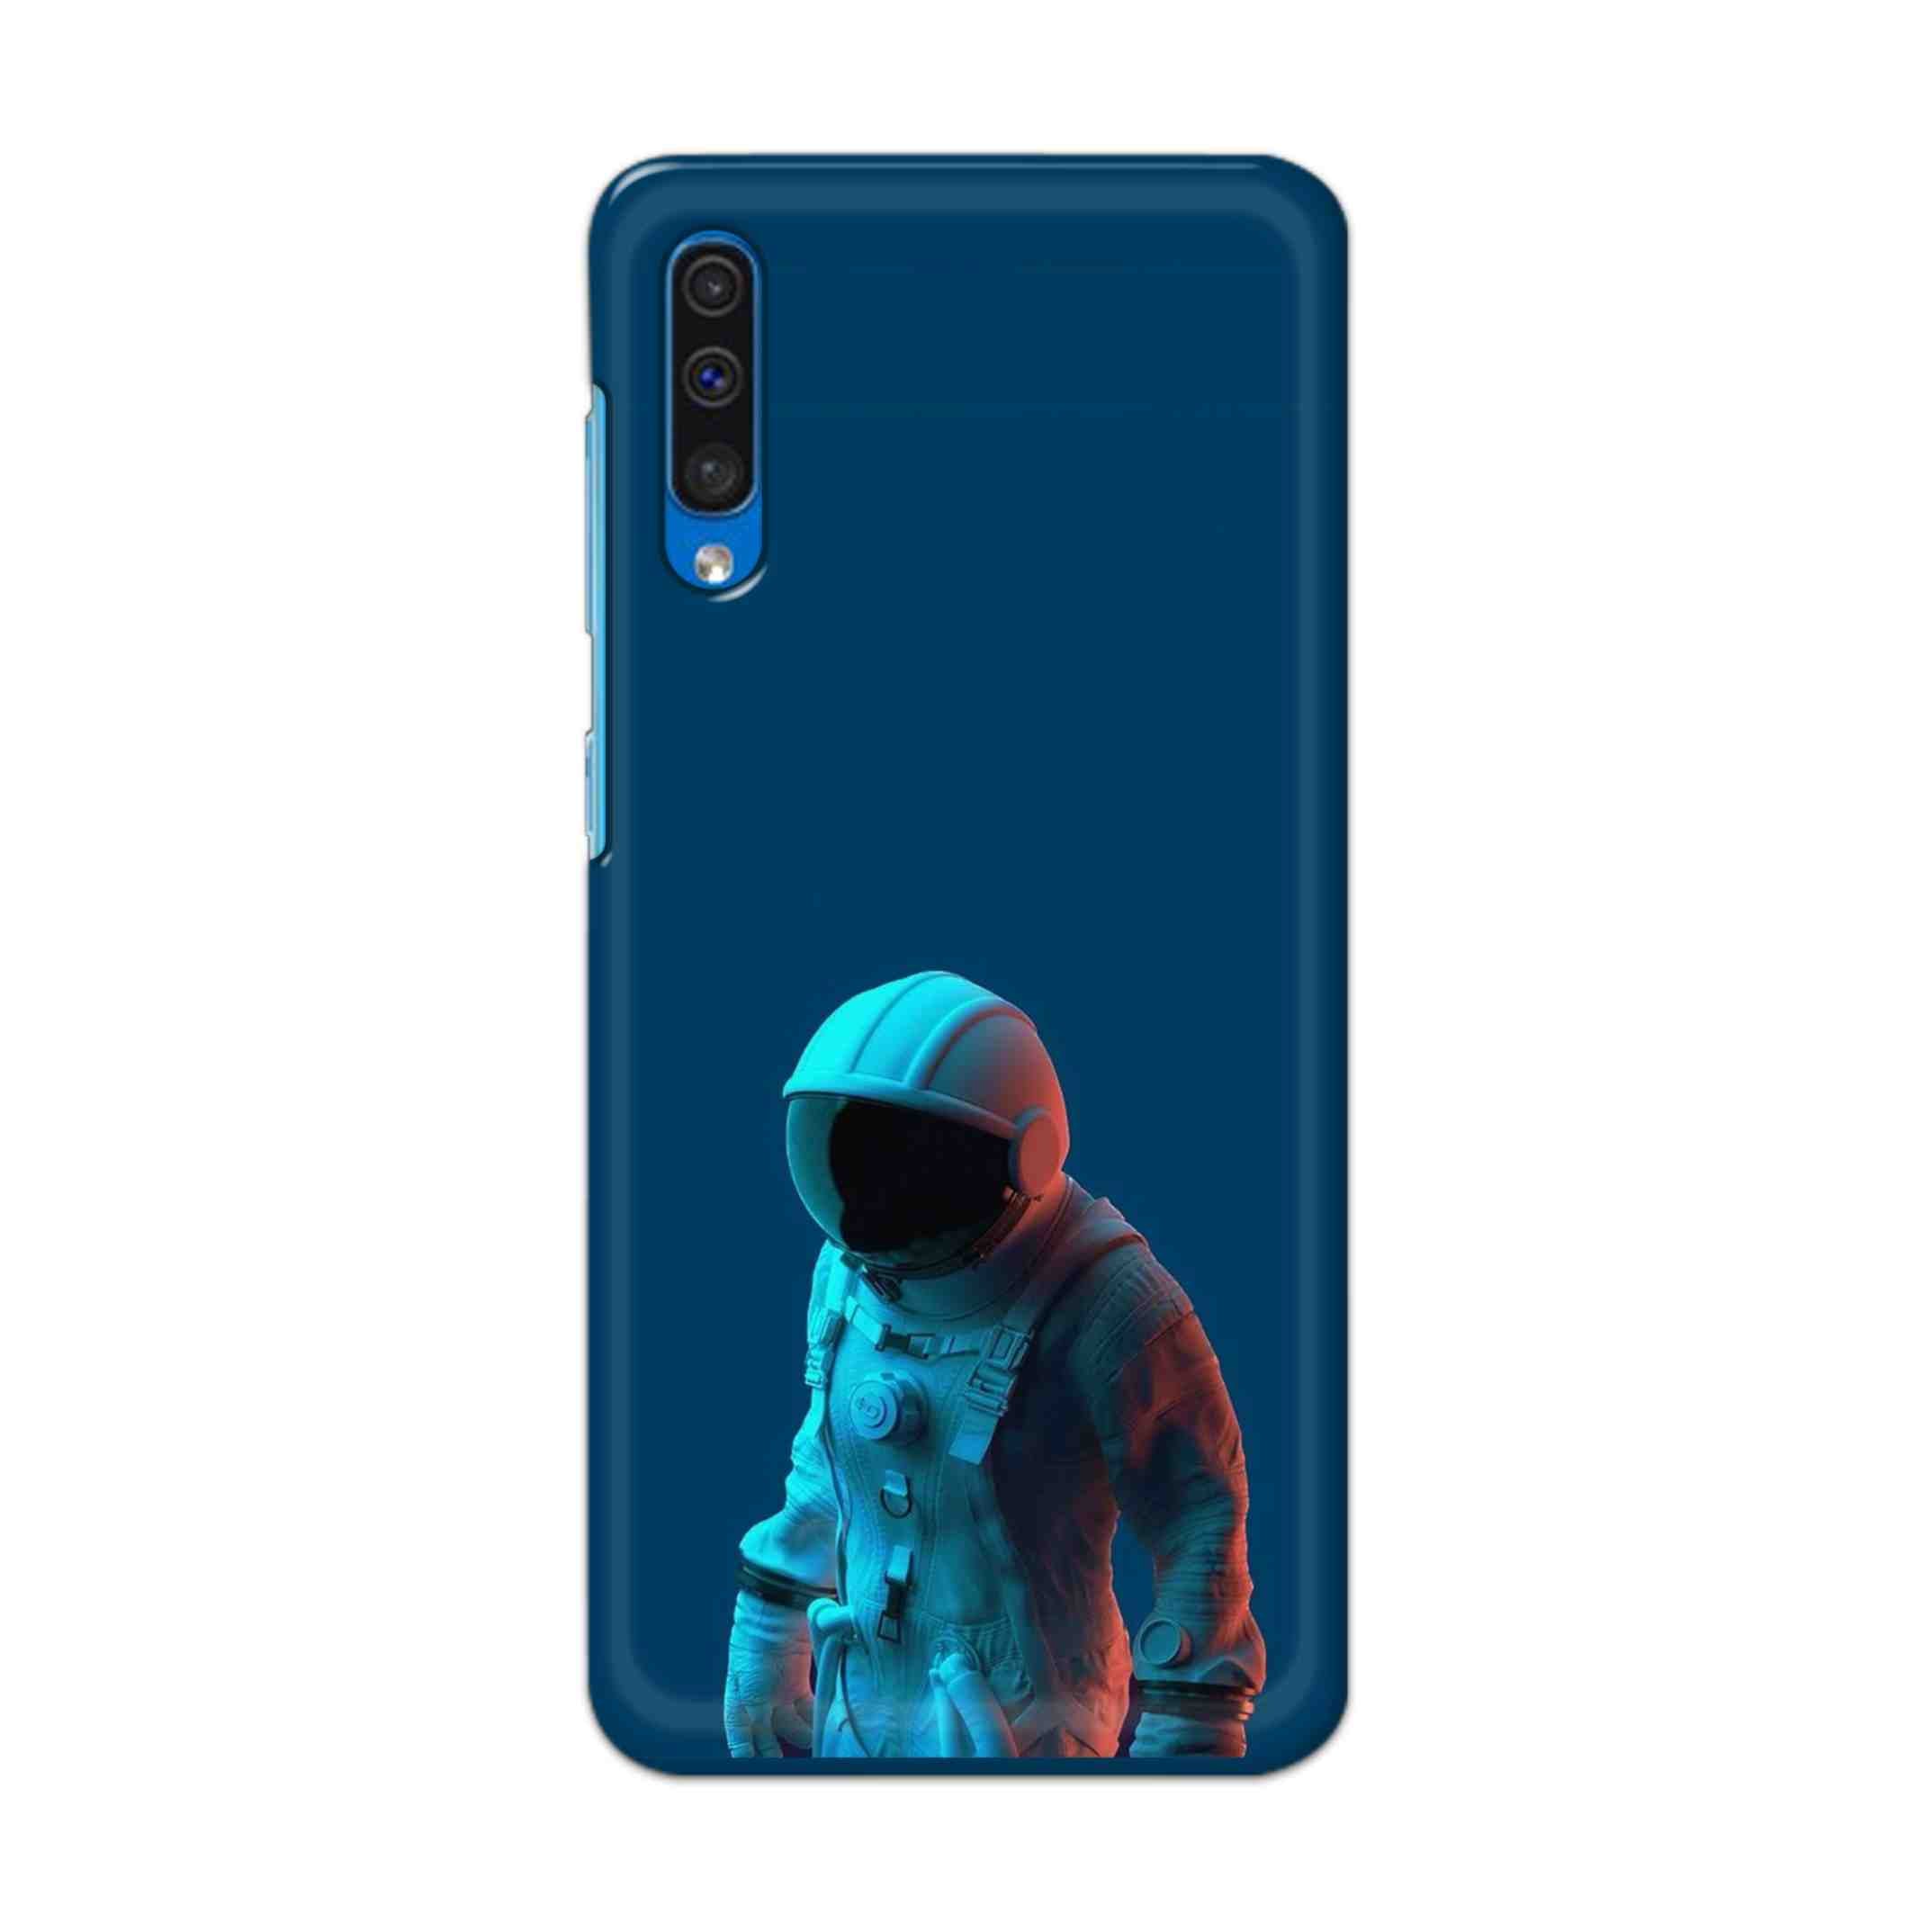 Buy Blue Astronaut Hard Back Mobile Phone Case Cover For Samsung Galaxy A50 / A50s / A30s Online